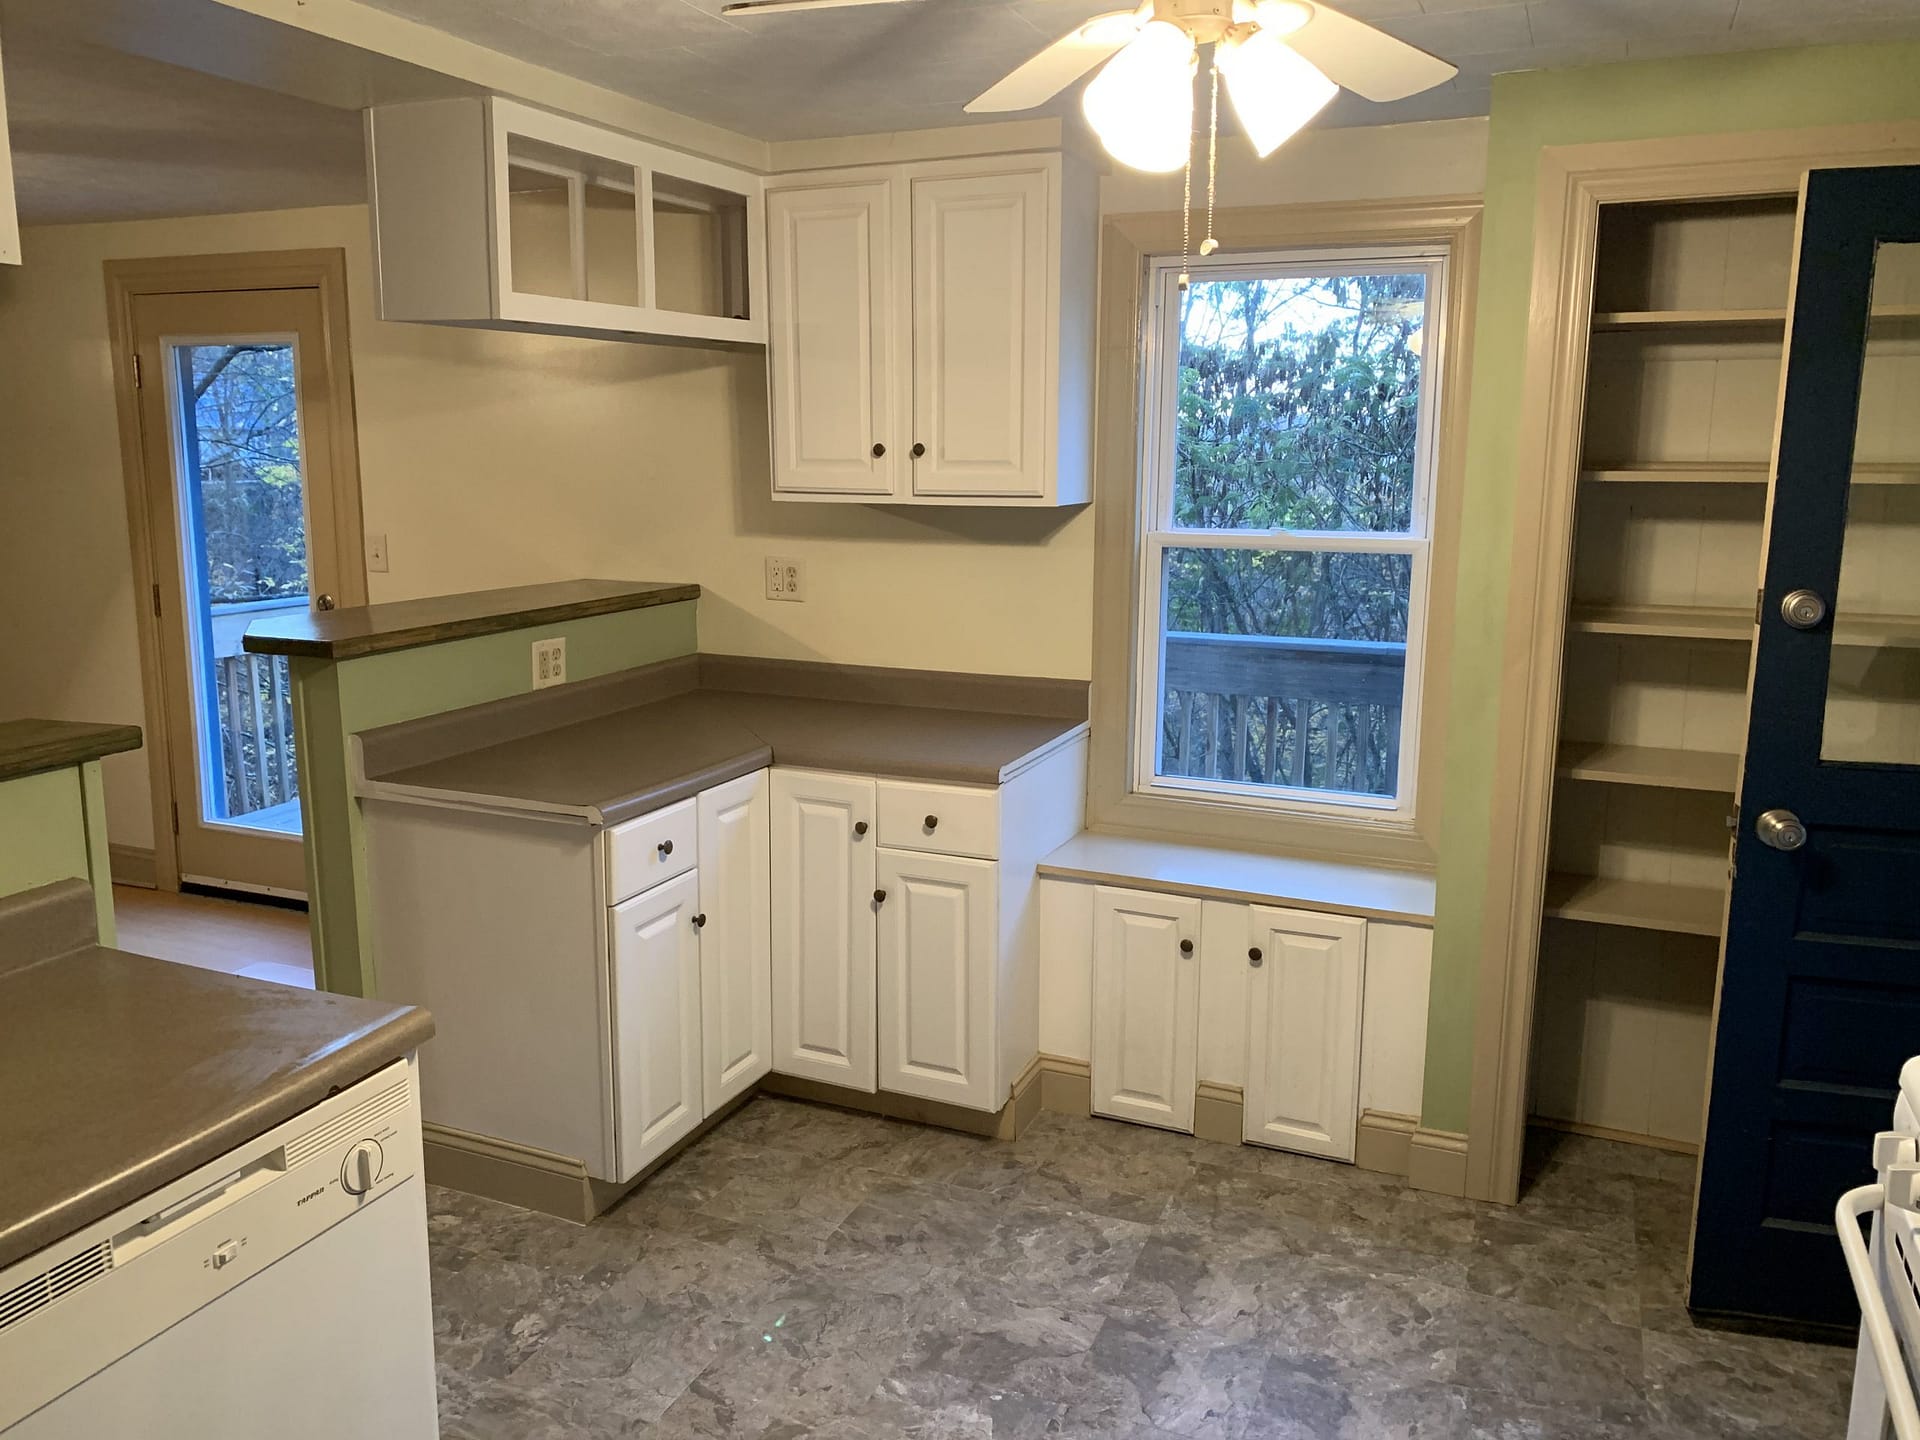 Kitchen Counters and window